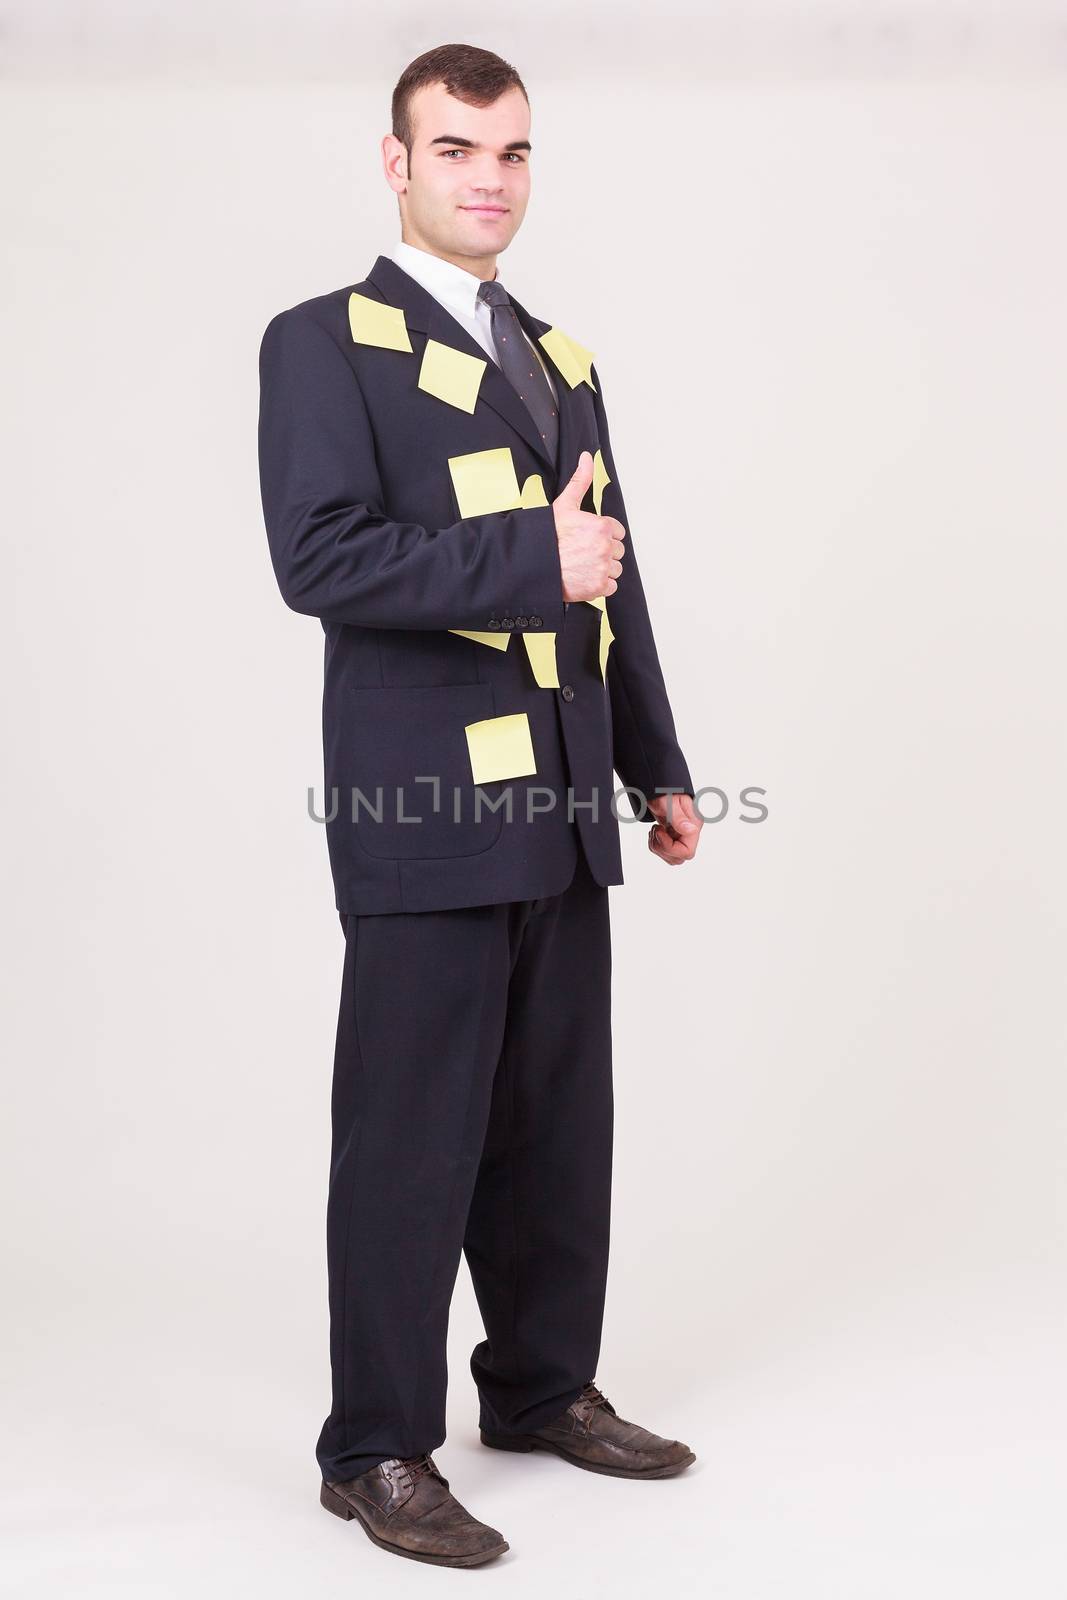 Forgetful businessman with sticky notes by STphotography